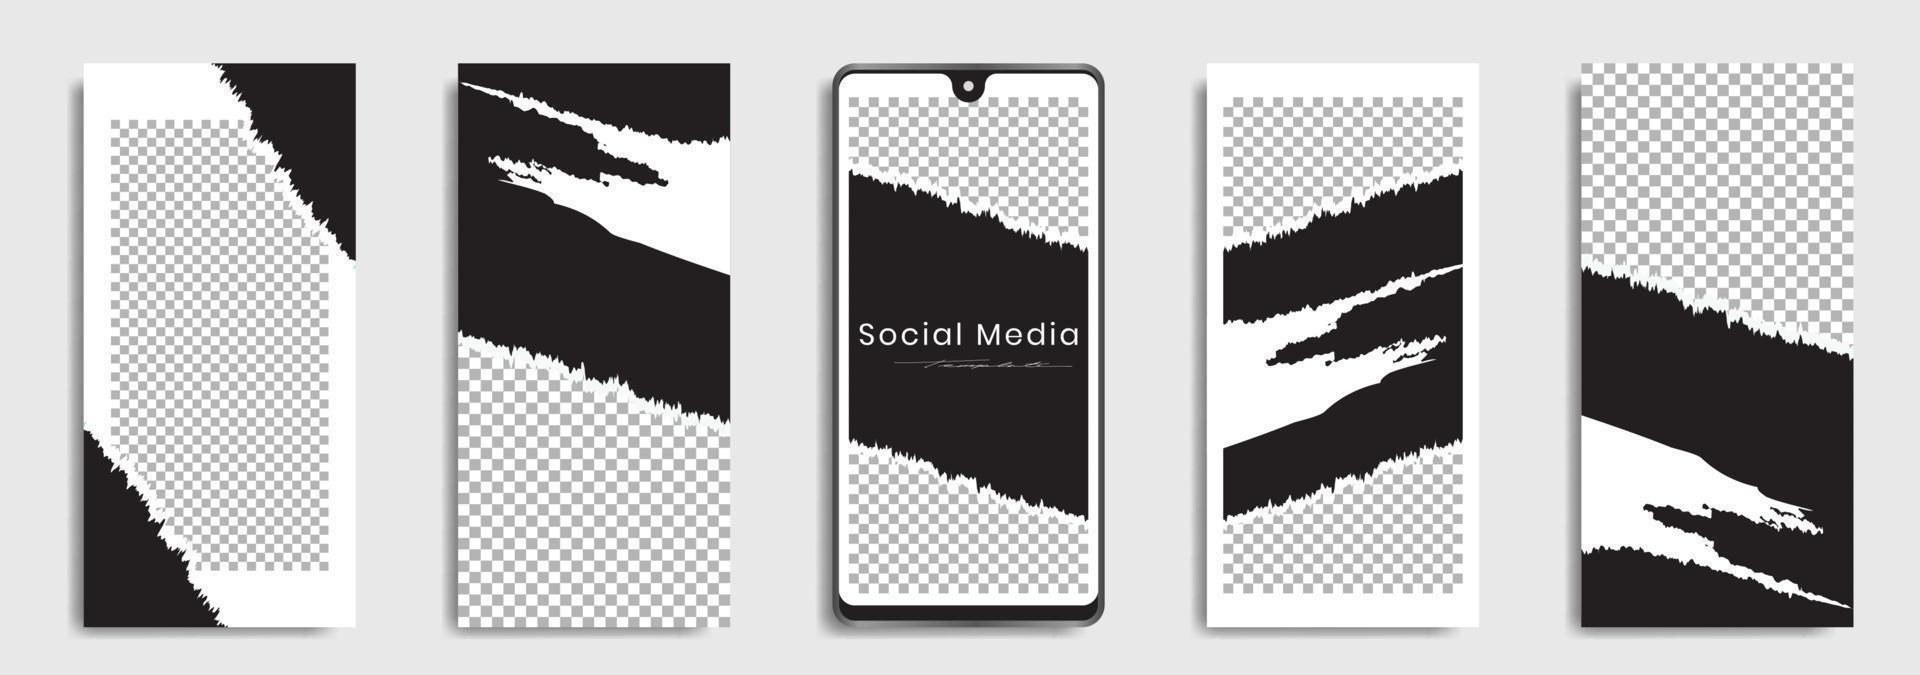 Editable social media post templates or Facebook, Instagram story collections and post frame, layout designs, Mockup for marketing promotions, covers, banners, backgrounds, square puzzles, vector